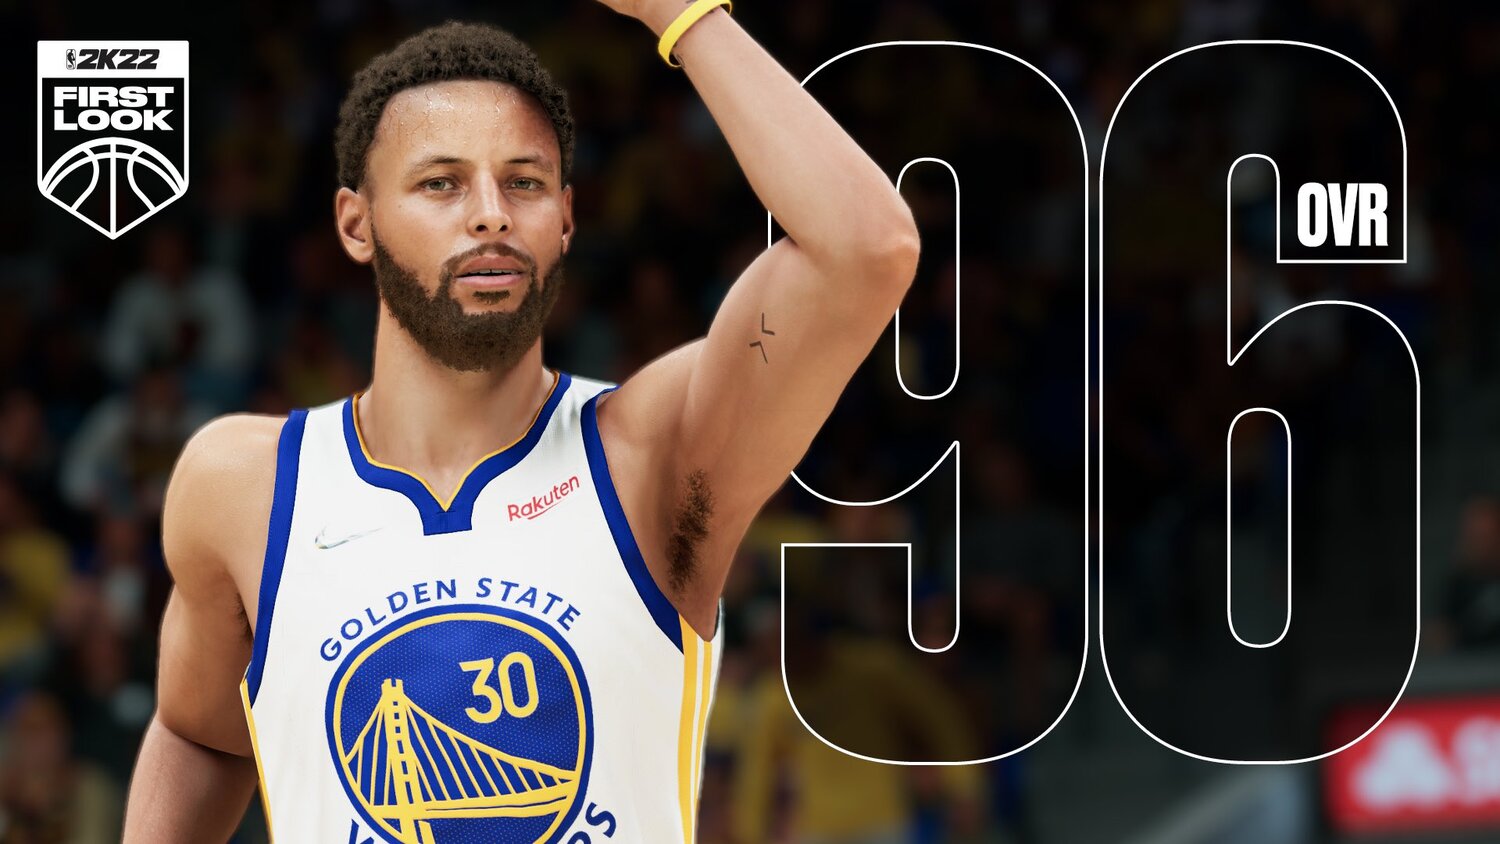 100 Best Players In The NBA 2K22: LeBron, KD, Curry, And Giannis